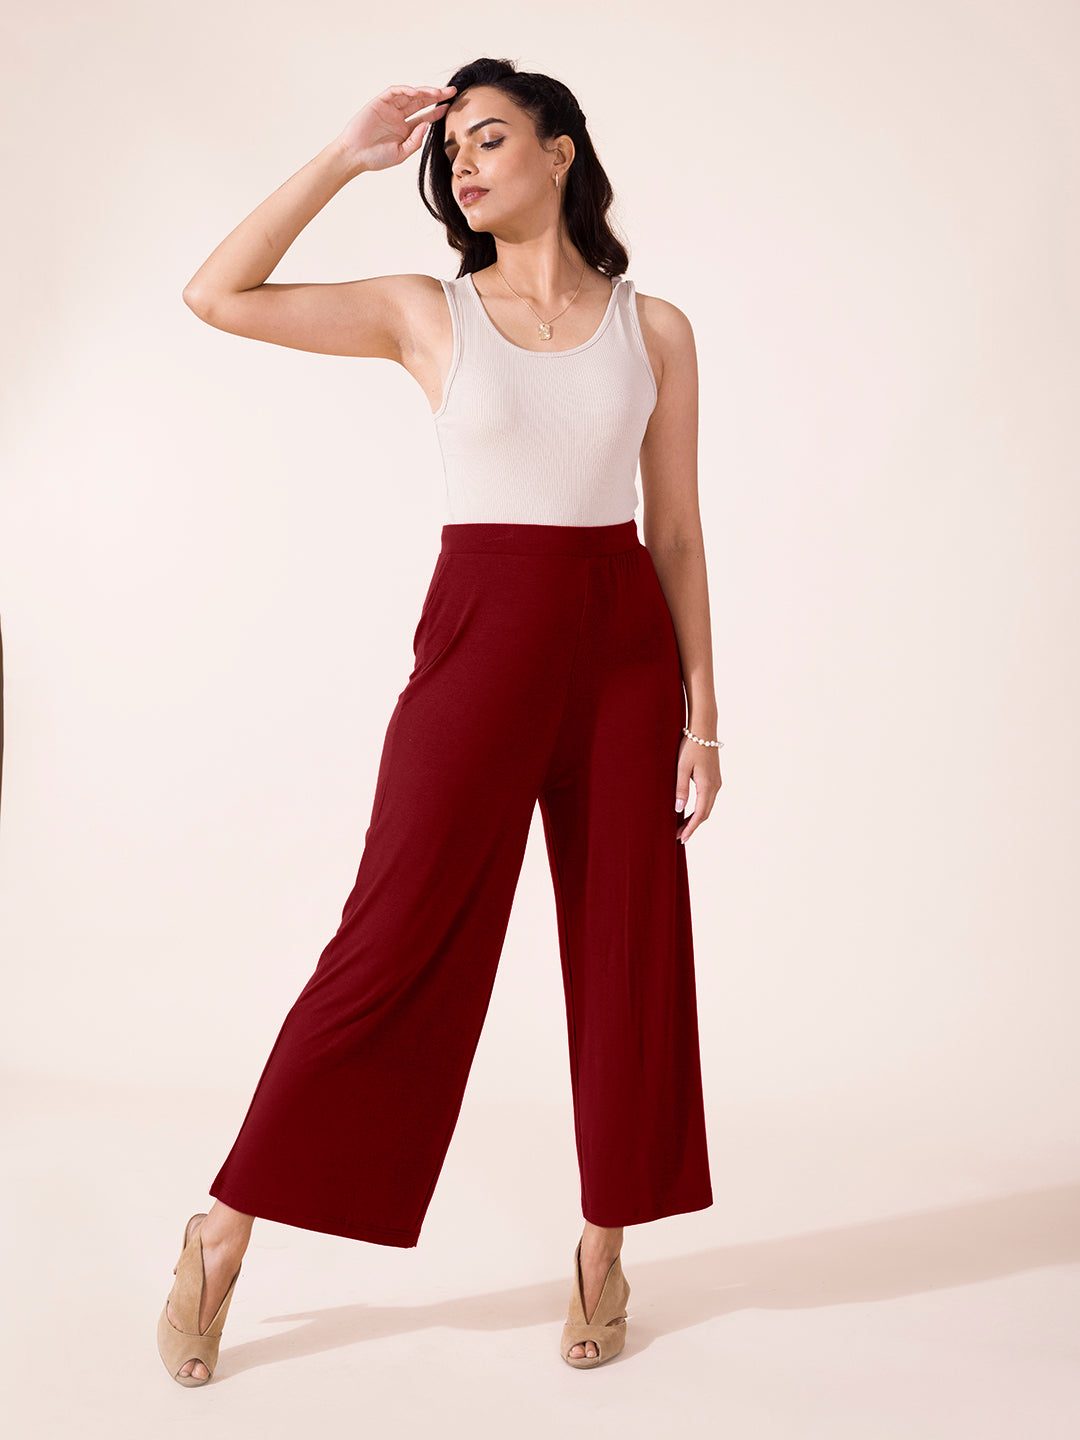 How To Wear Palazzos: Ultimate Guide With 11 Palazzo Pants Outfits